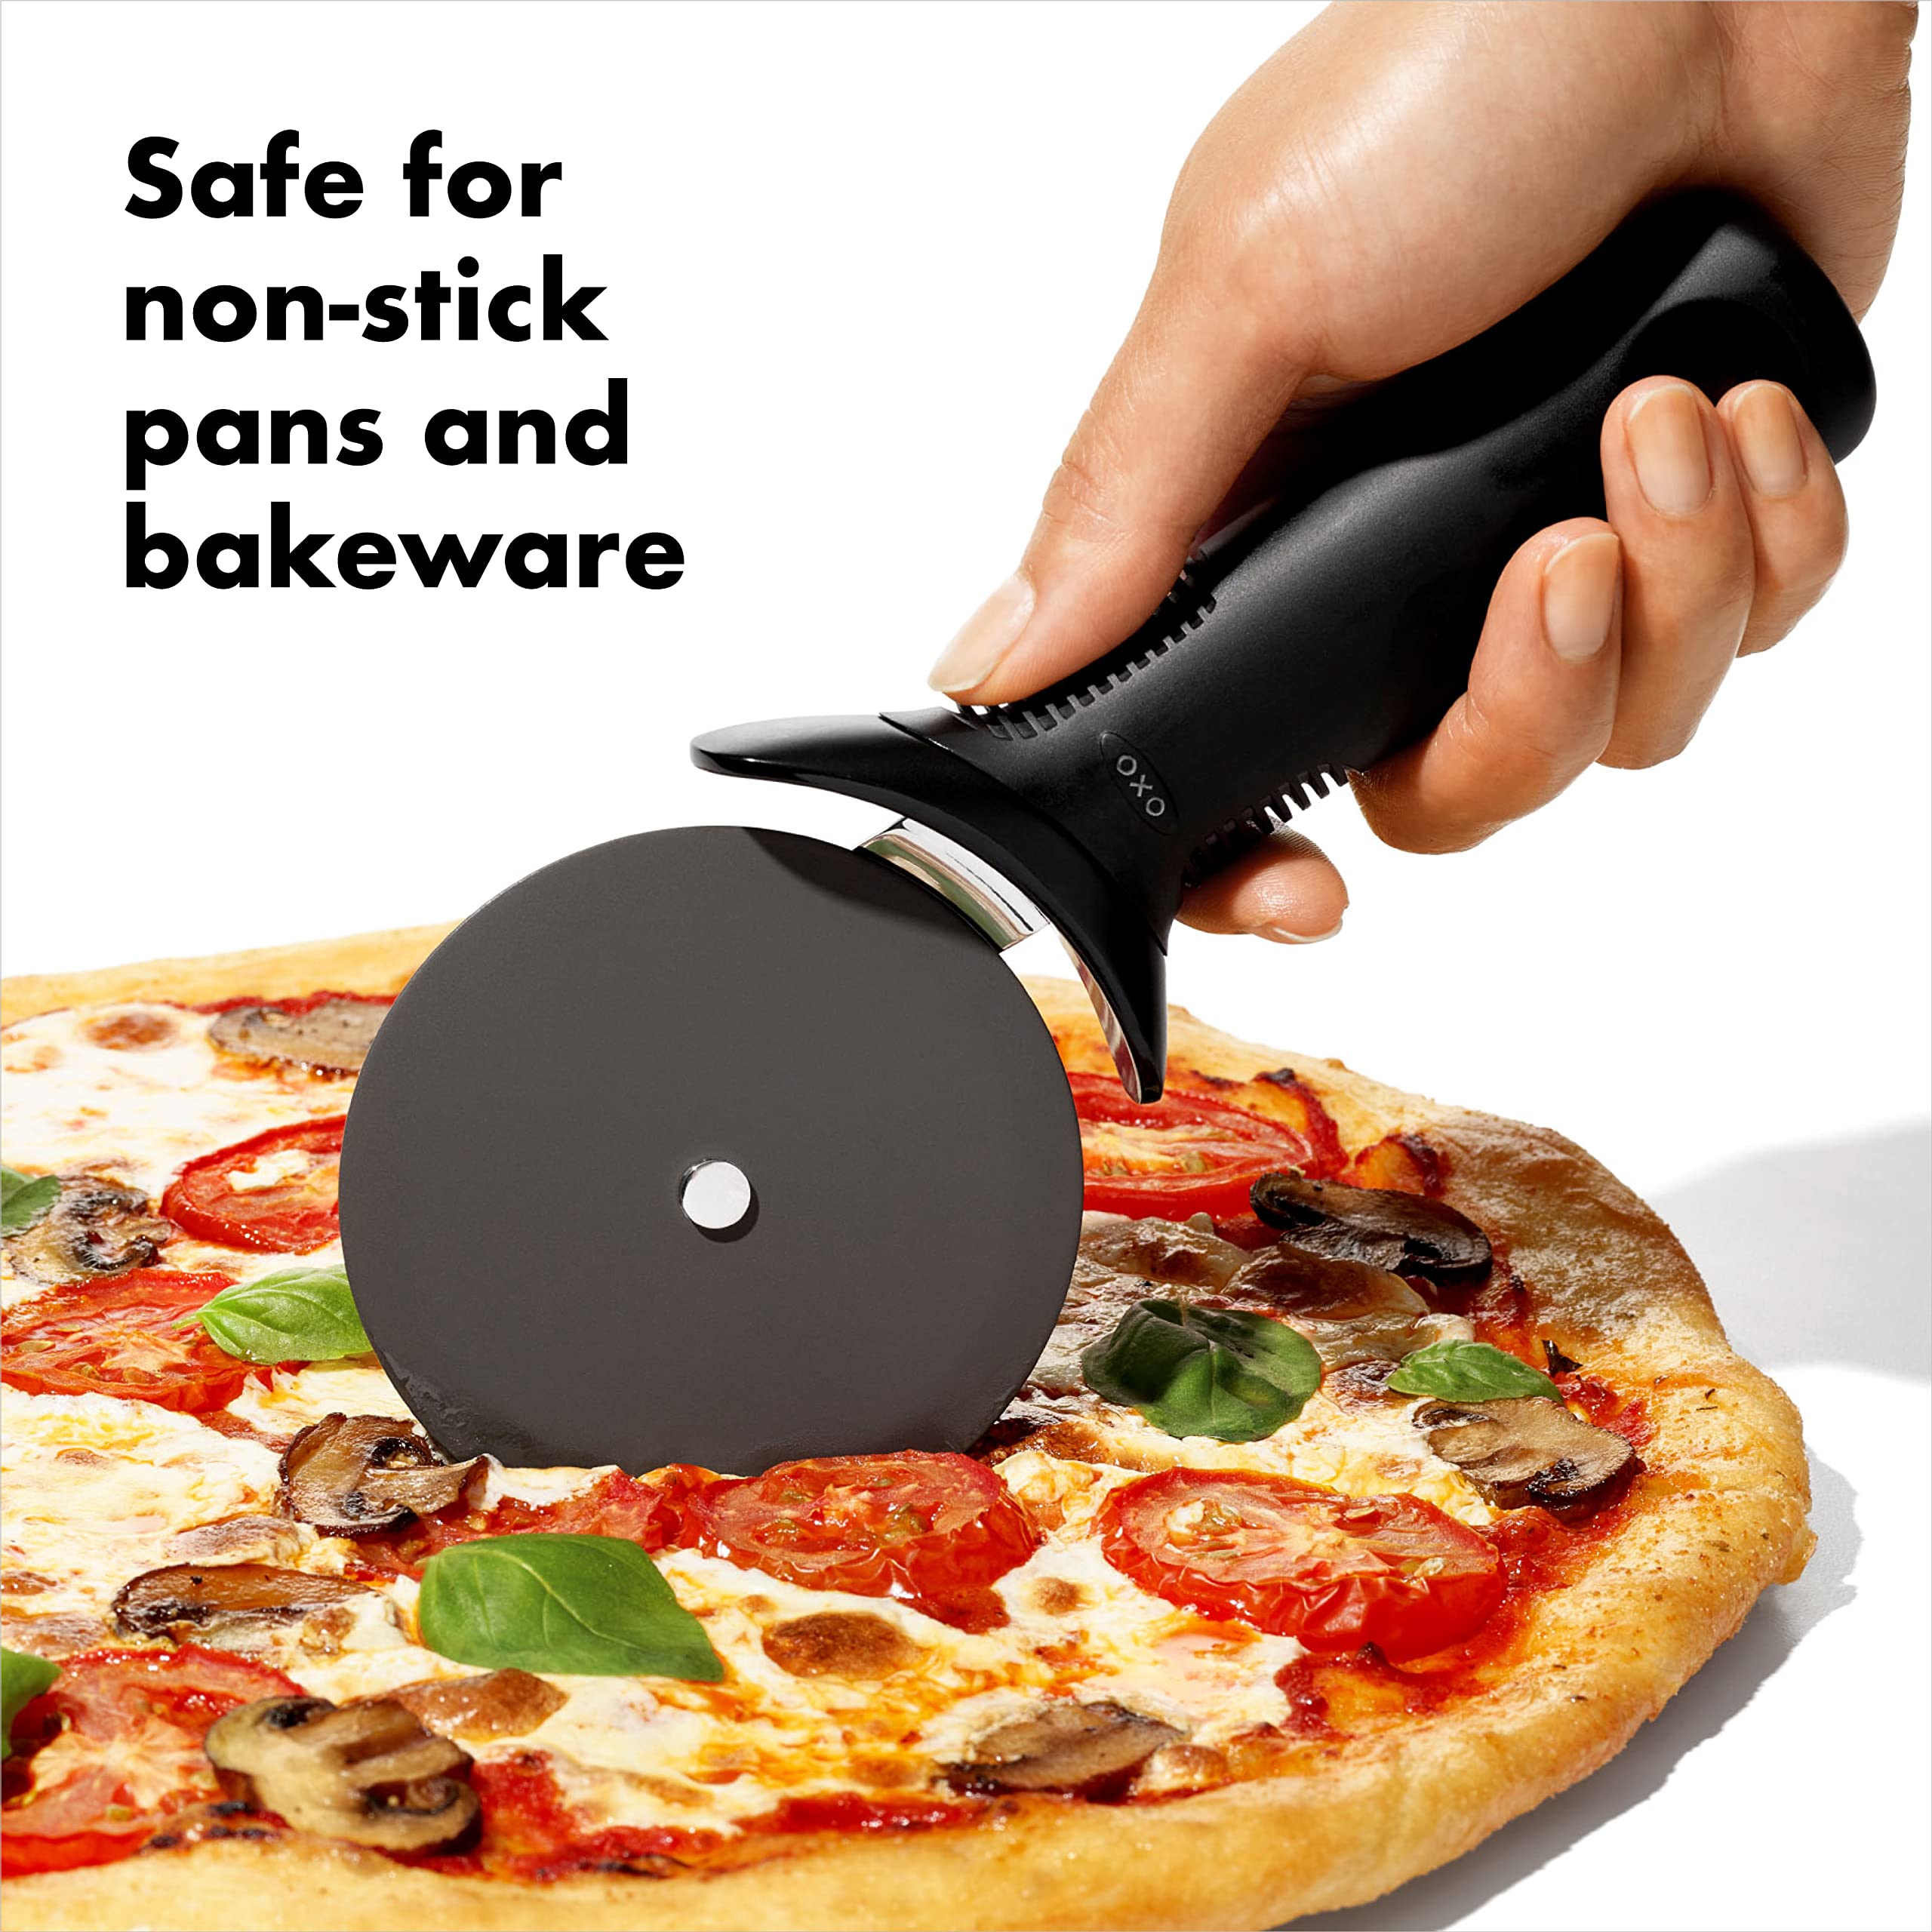 OXO Good Grips Pizza Wheel and Cutter for Non-Stick Pans